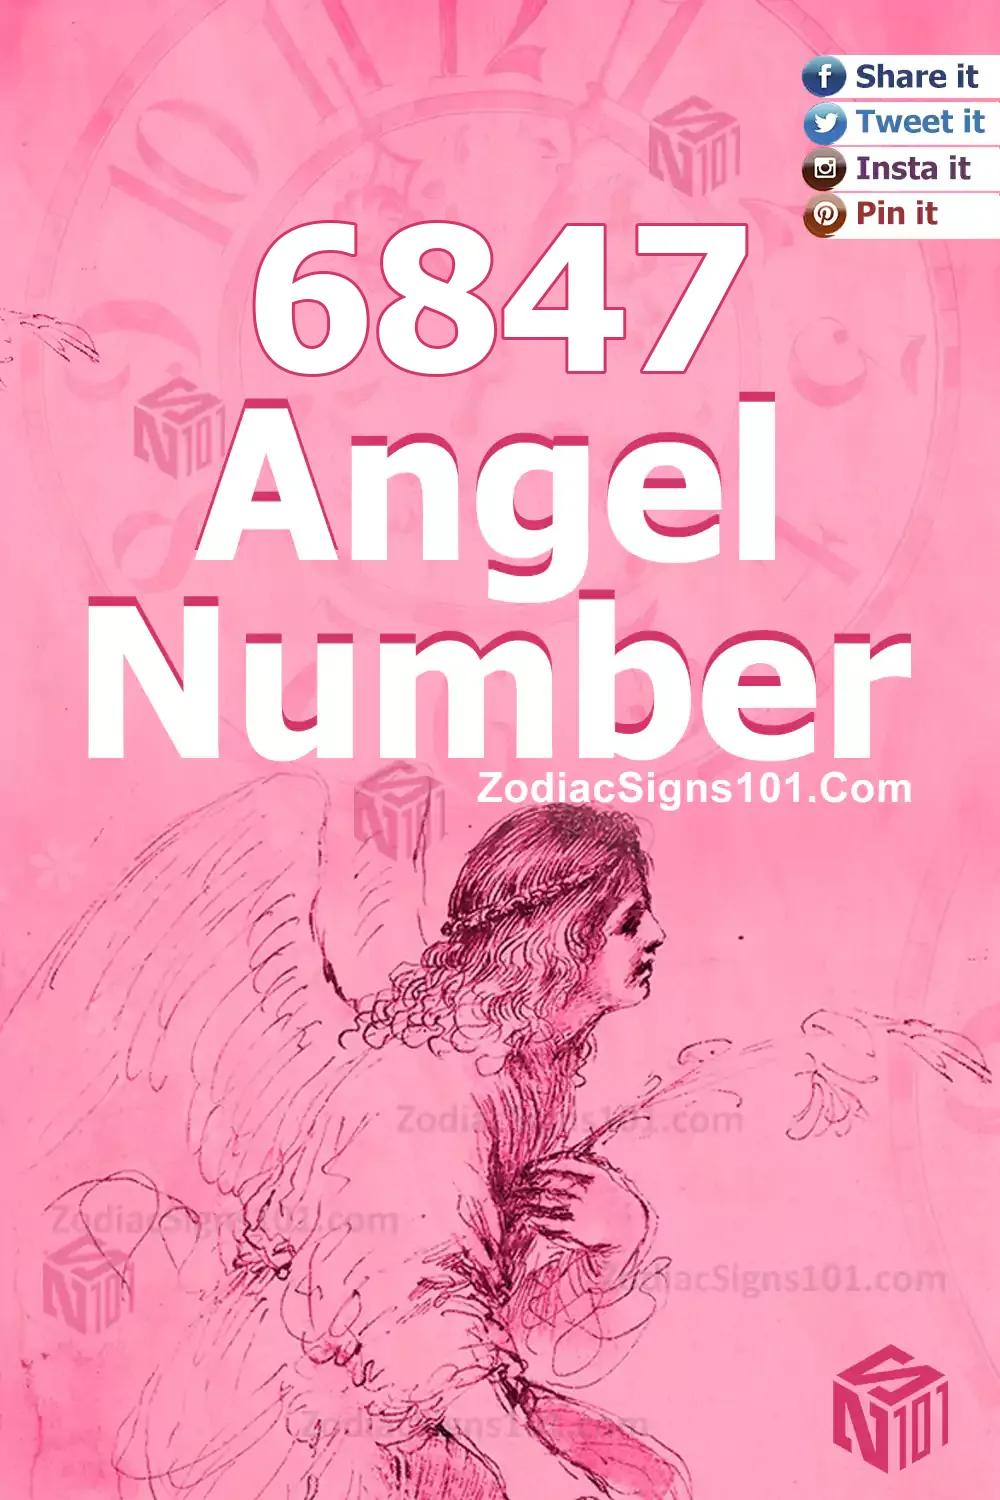 6847 Angel Number Meaning